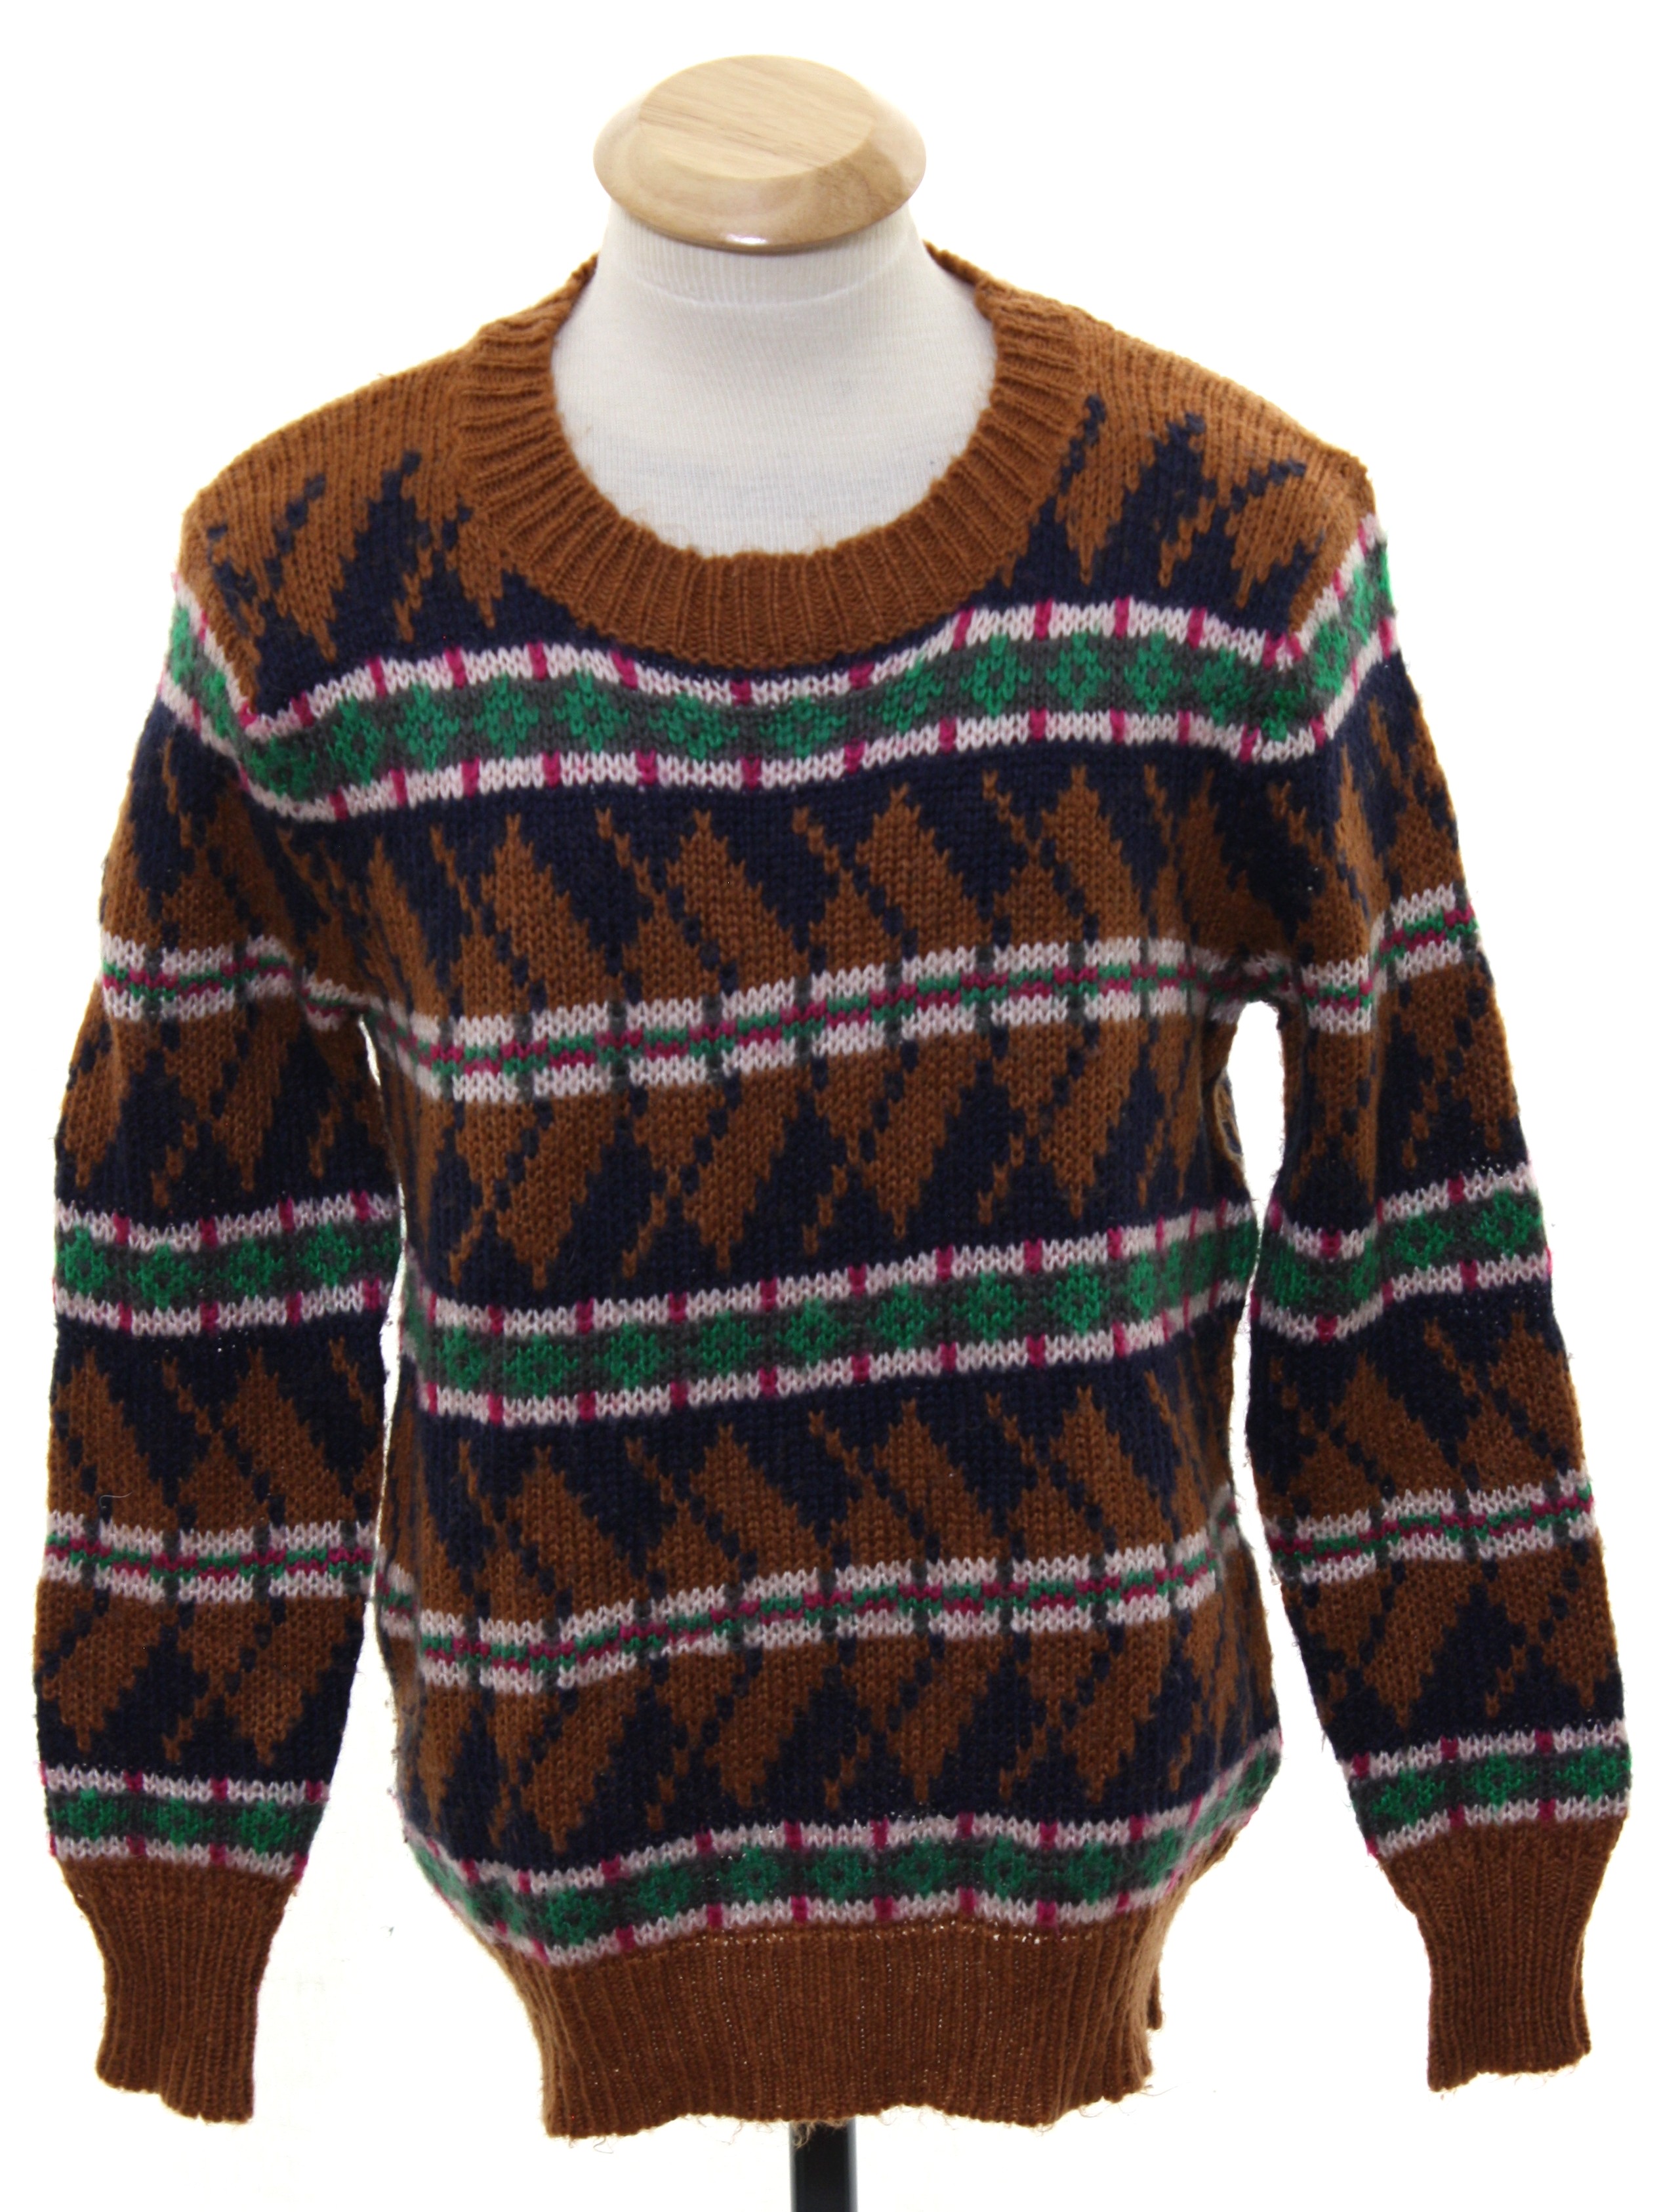 Vintage 80's Sweater: Early 80s -No Label- Boys tan background acrylic ...